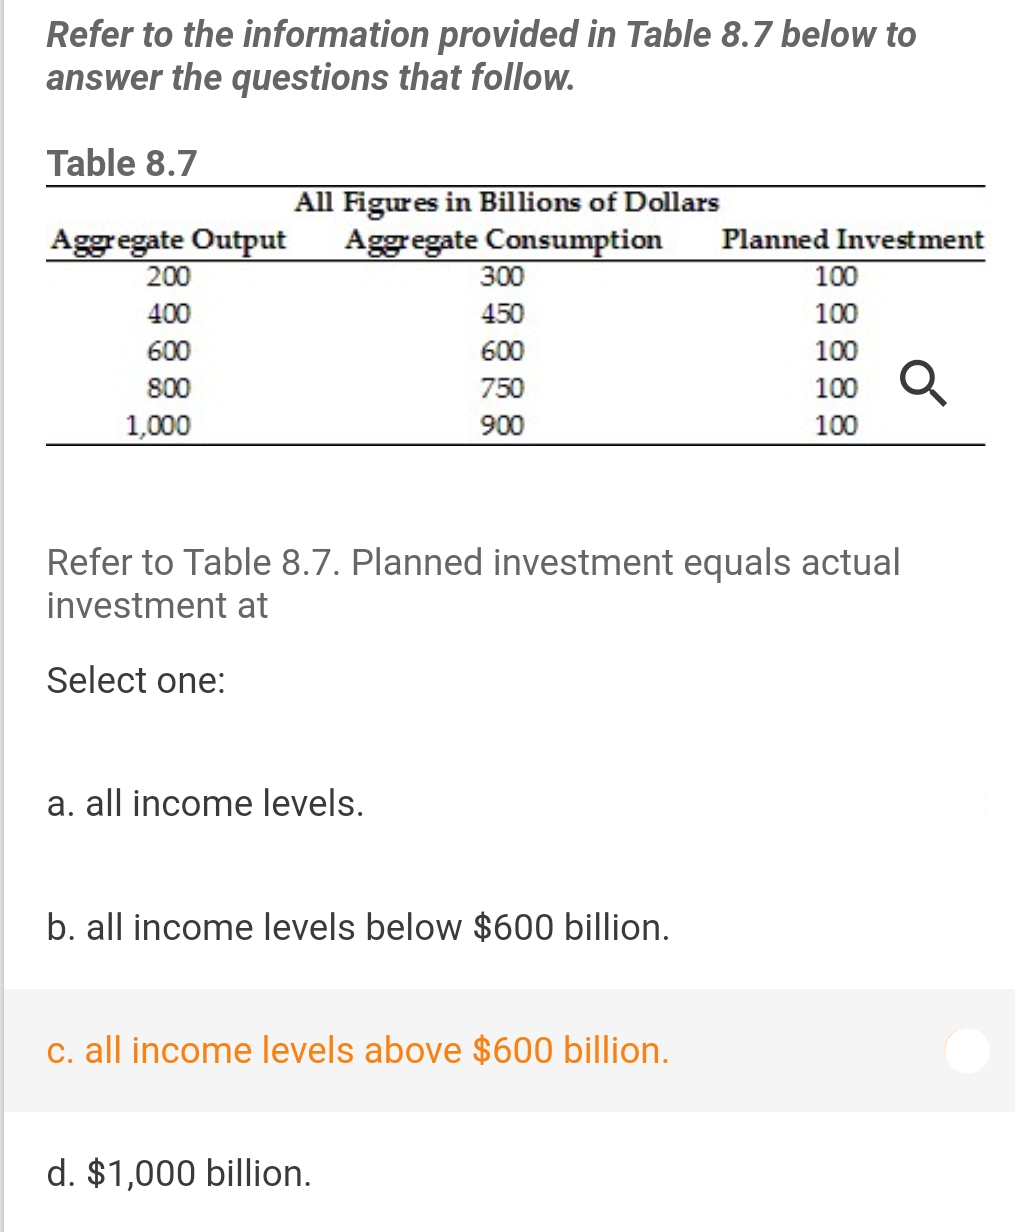 Refer to the information provided in Table 8.7 below to
answer the questions that follow.
Table 8.7
All Figures in Billions of Dollars
Aggregate Consumption
Aggregate Output
Planned Investment
100
200
300
400
450
100
600
600
100
800
750
100
1,000
900
100
Refer to Table 8.7. Planned investment equals actual
investment at
Select one:
a. all income levels.
b. all income levels below $600 billion.
c. all income levels above $600 billion.
d. $1,000 billion.
